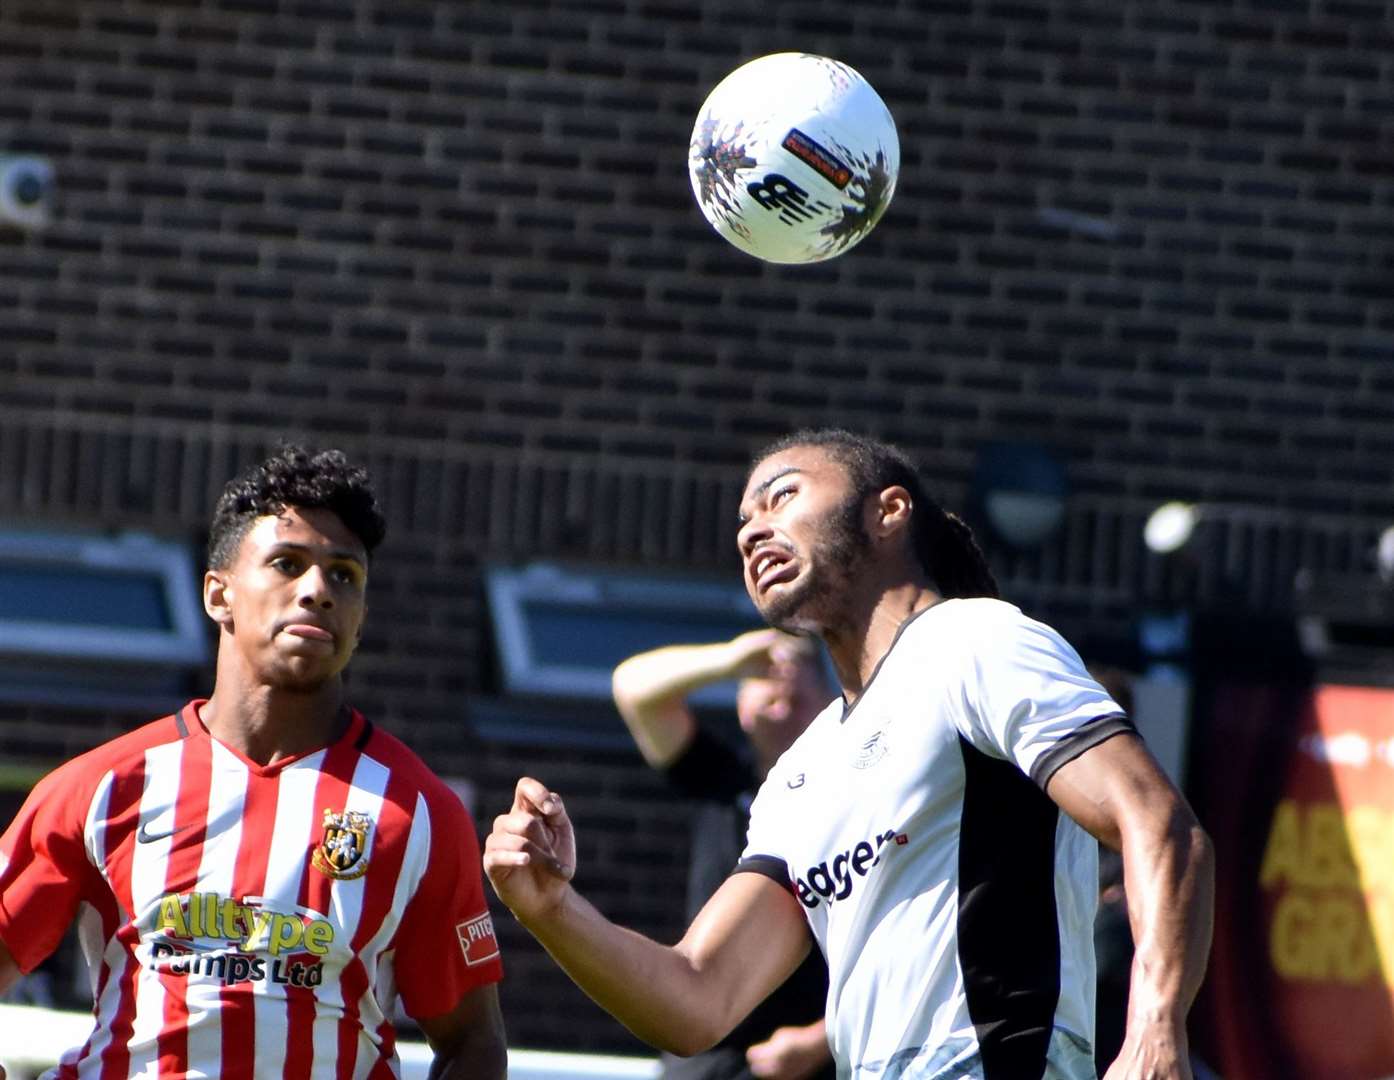 Jordan Ababio, of Folkestone, closes in on a Dover player in a friendly earlier this month. Picture: Randolph File